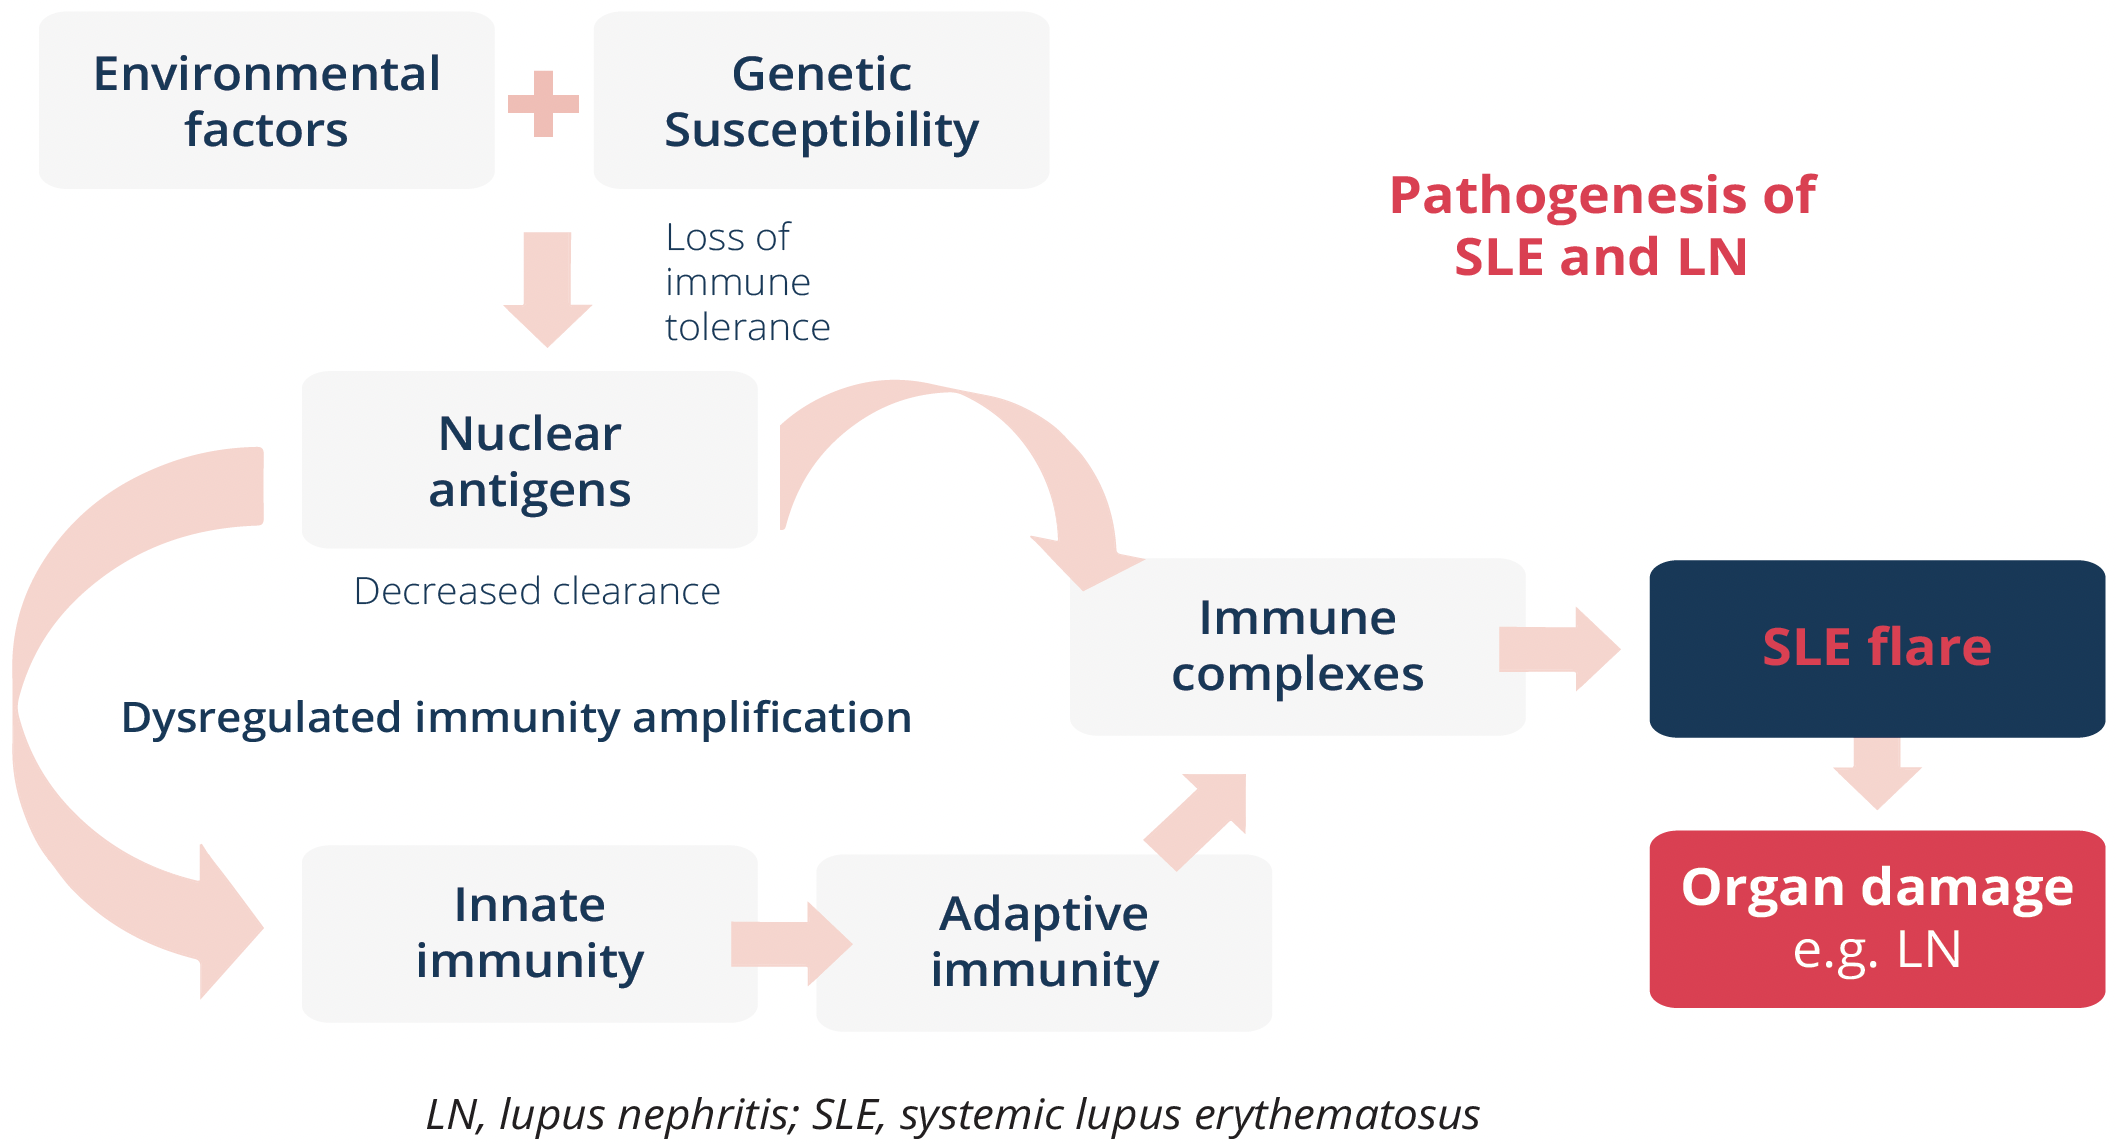 Pathogenesis of SLE and LN, potentially leading to organ damage